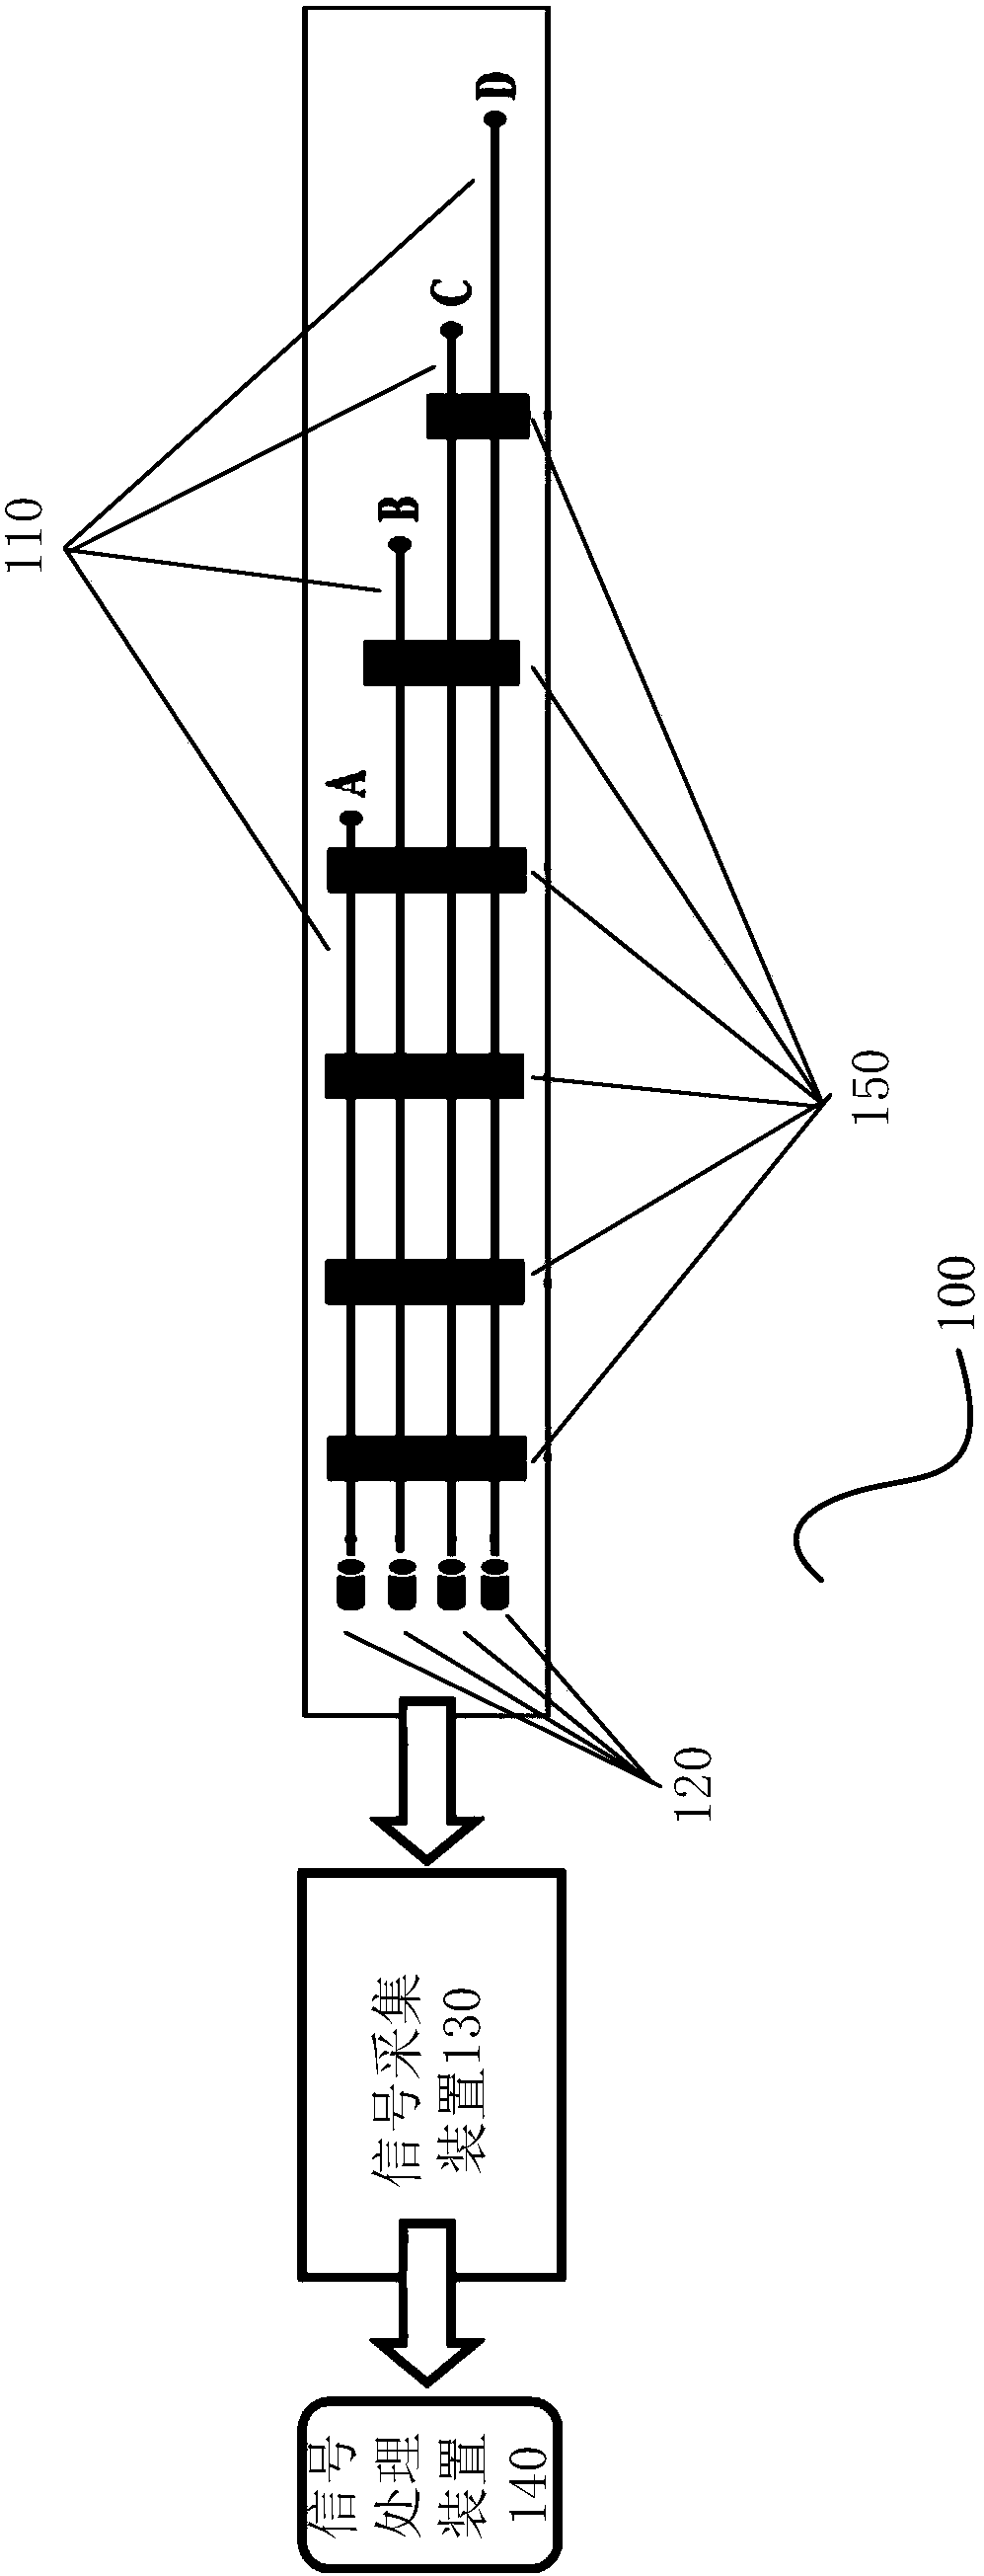 A system for monitoring blade deformation of wind power generation equipment